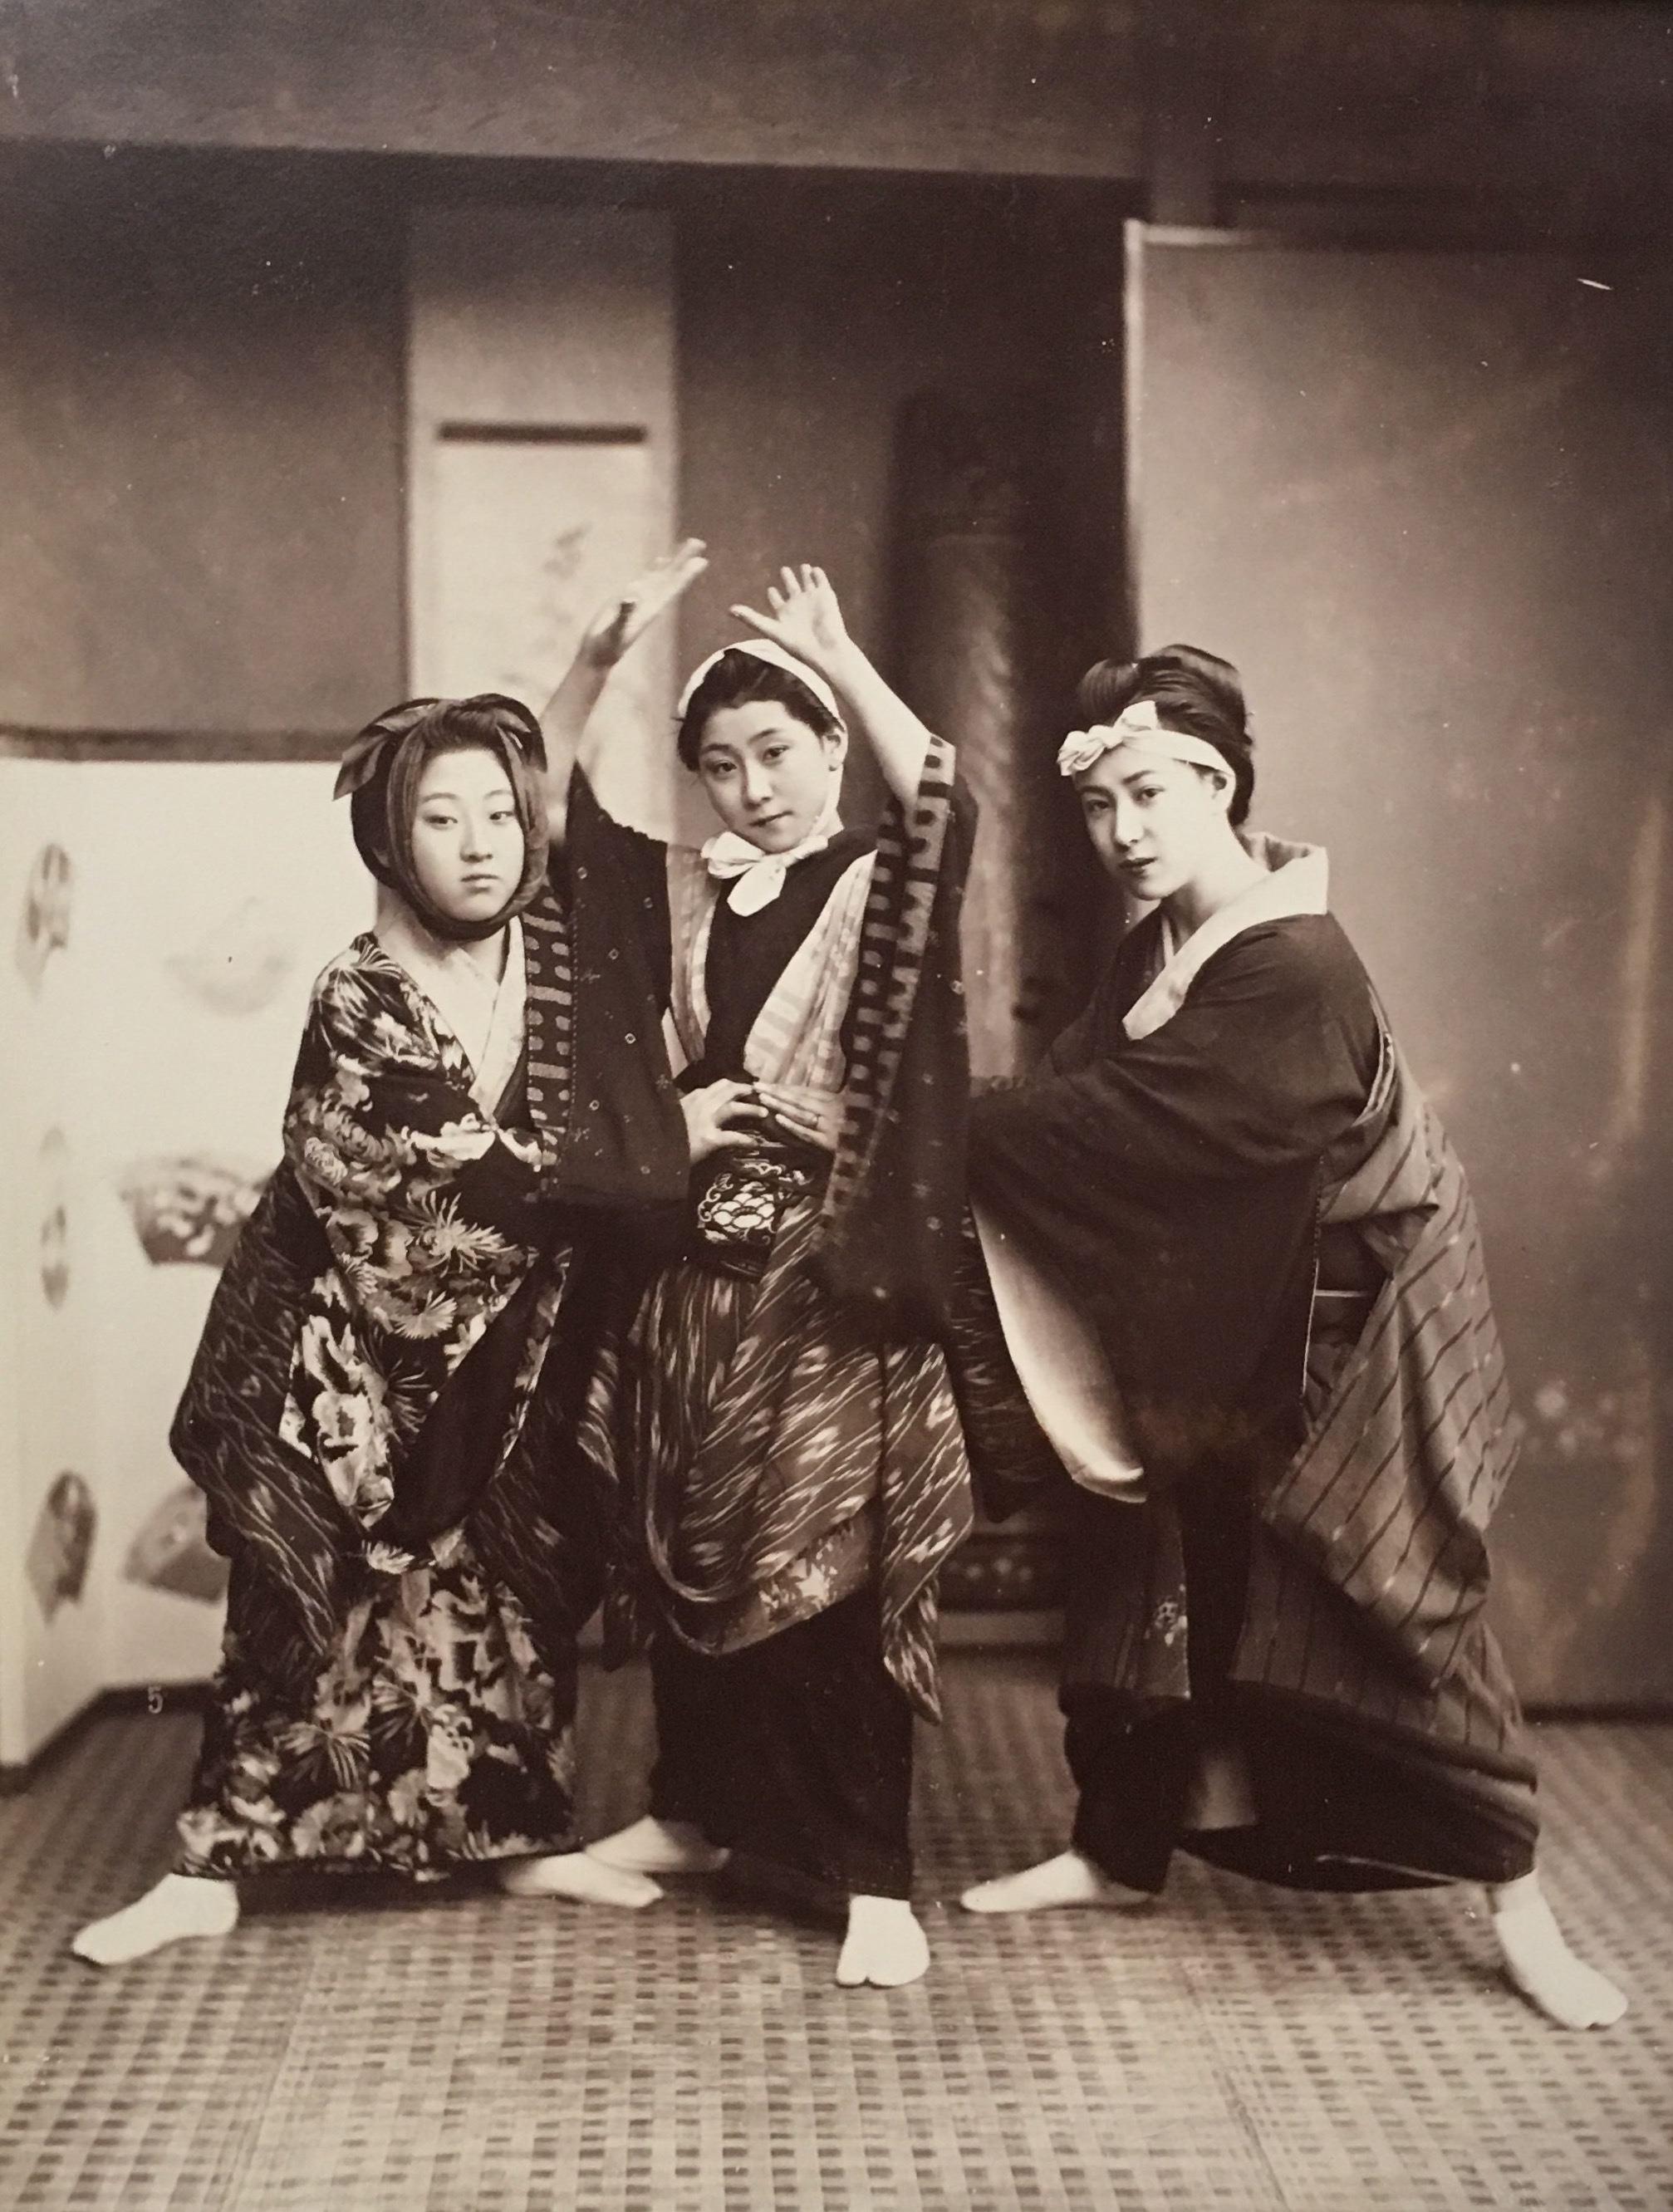 Unidentified Photographer  Black and White Photograph - Dancing Party, c 1870